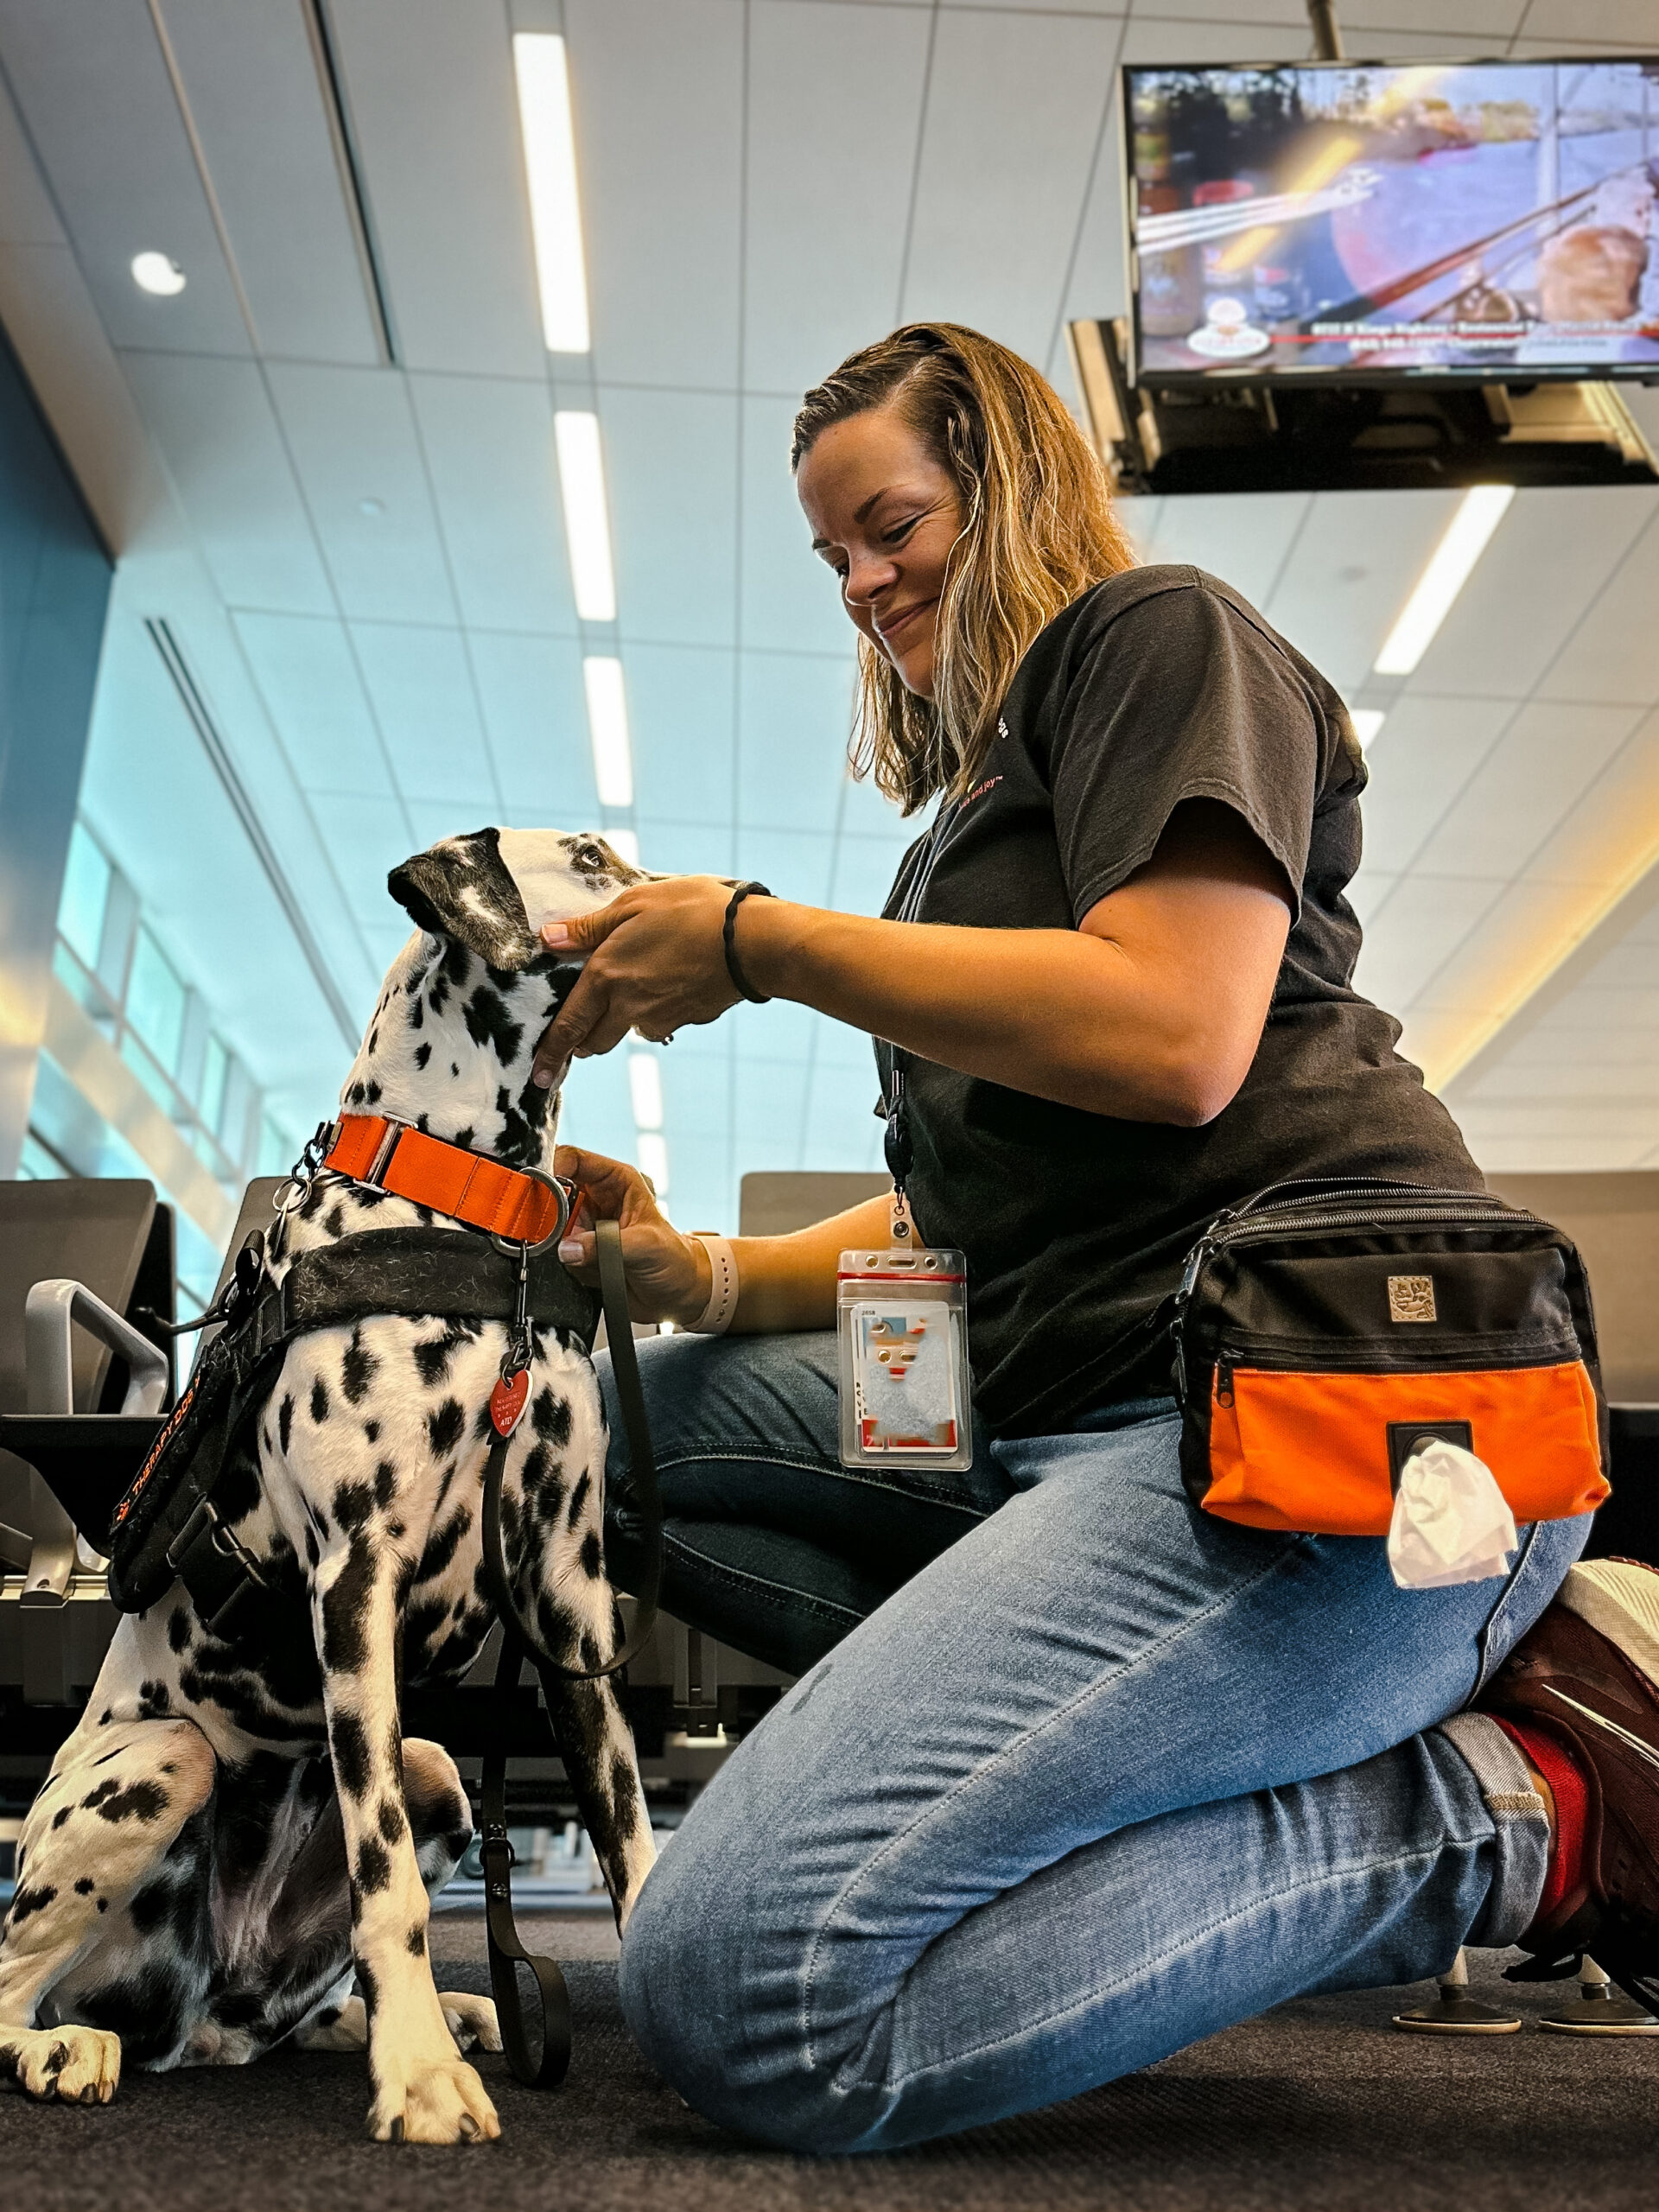 ATD board member initiates therapy dog skills training with their Dalmation.